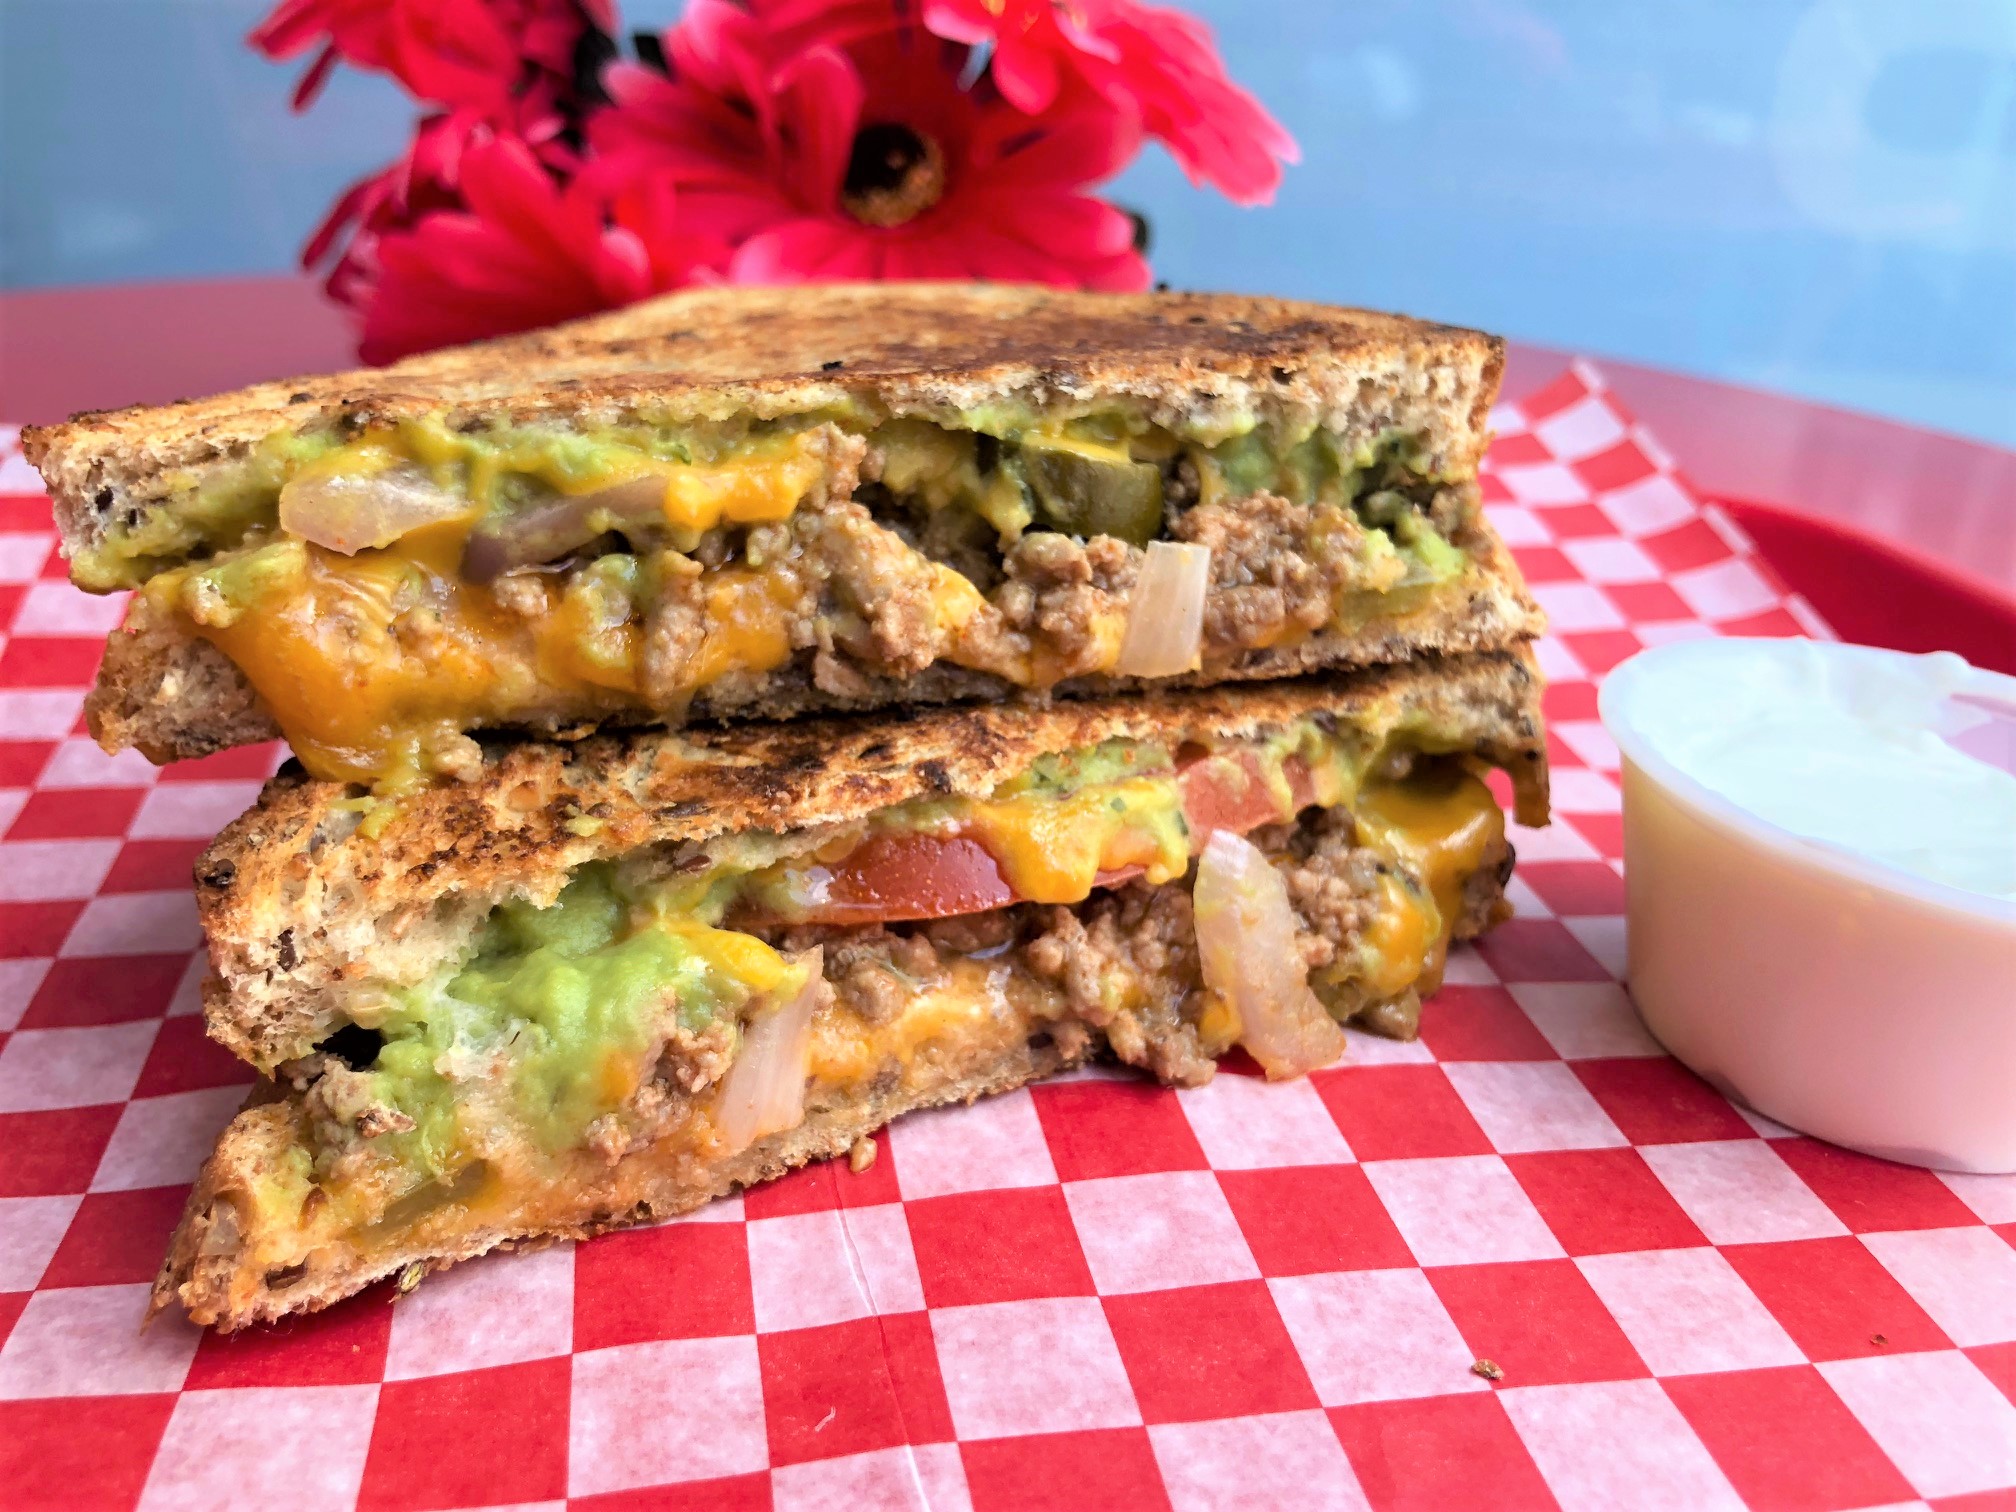 The Taco Surpreme grilled cheese sandwich from Toasty's in Windsor, Ontario.